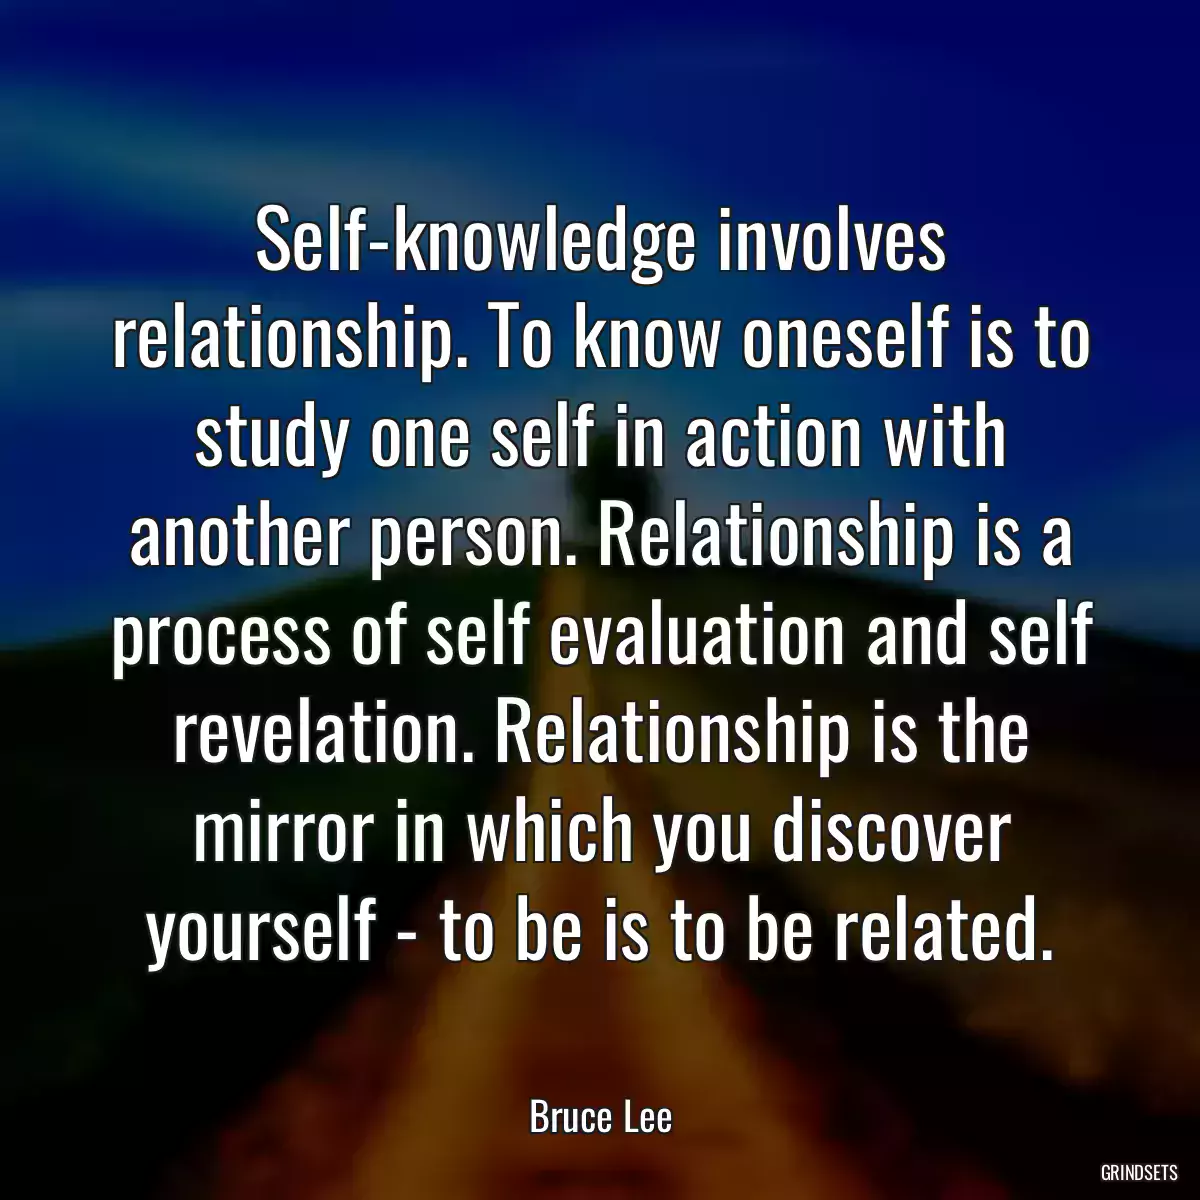 Self-knowledge involves relationship. To know oneself is to study one self in action with another person. Relationship is a process of self evaluation and self revelation. Relationship is the mirror in which you discover yourself - to be is to be related.